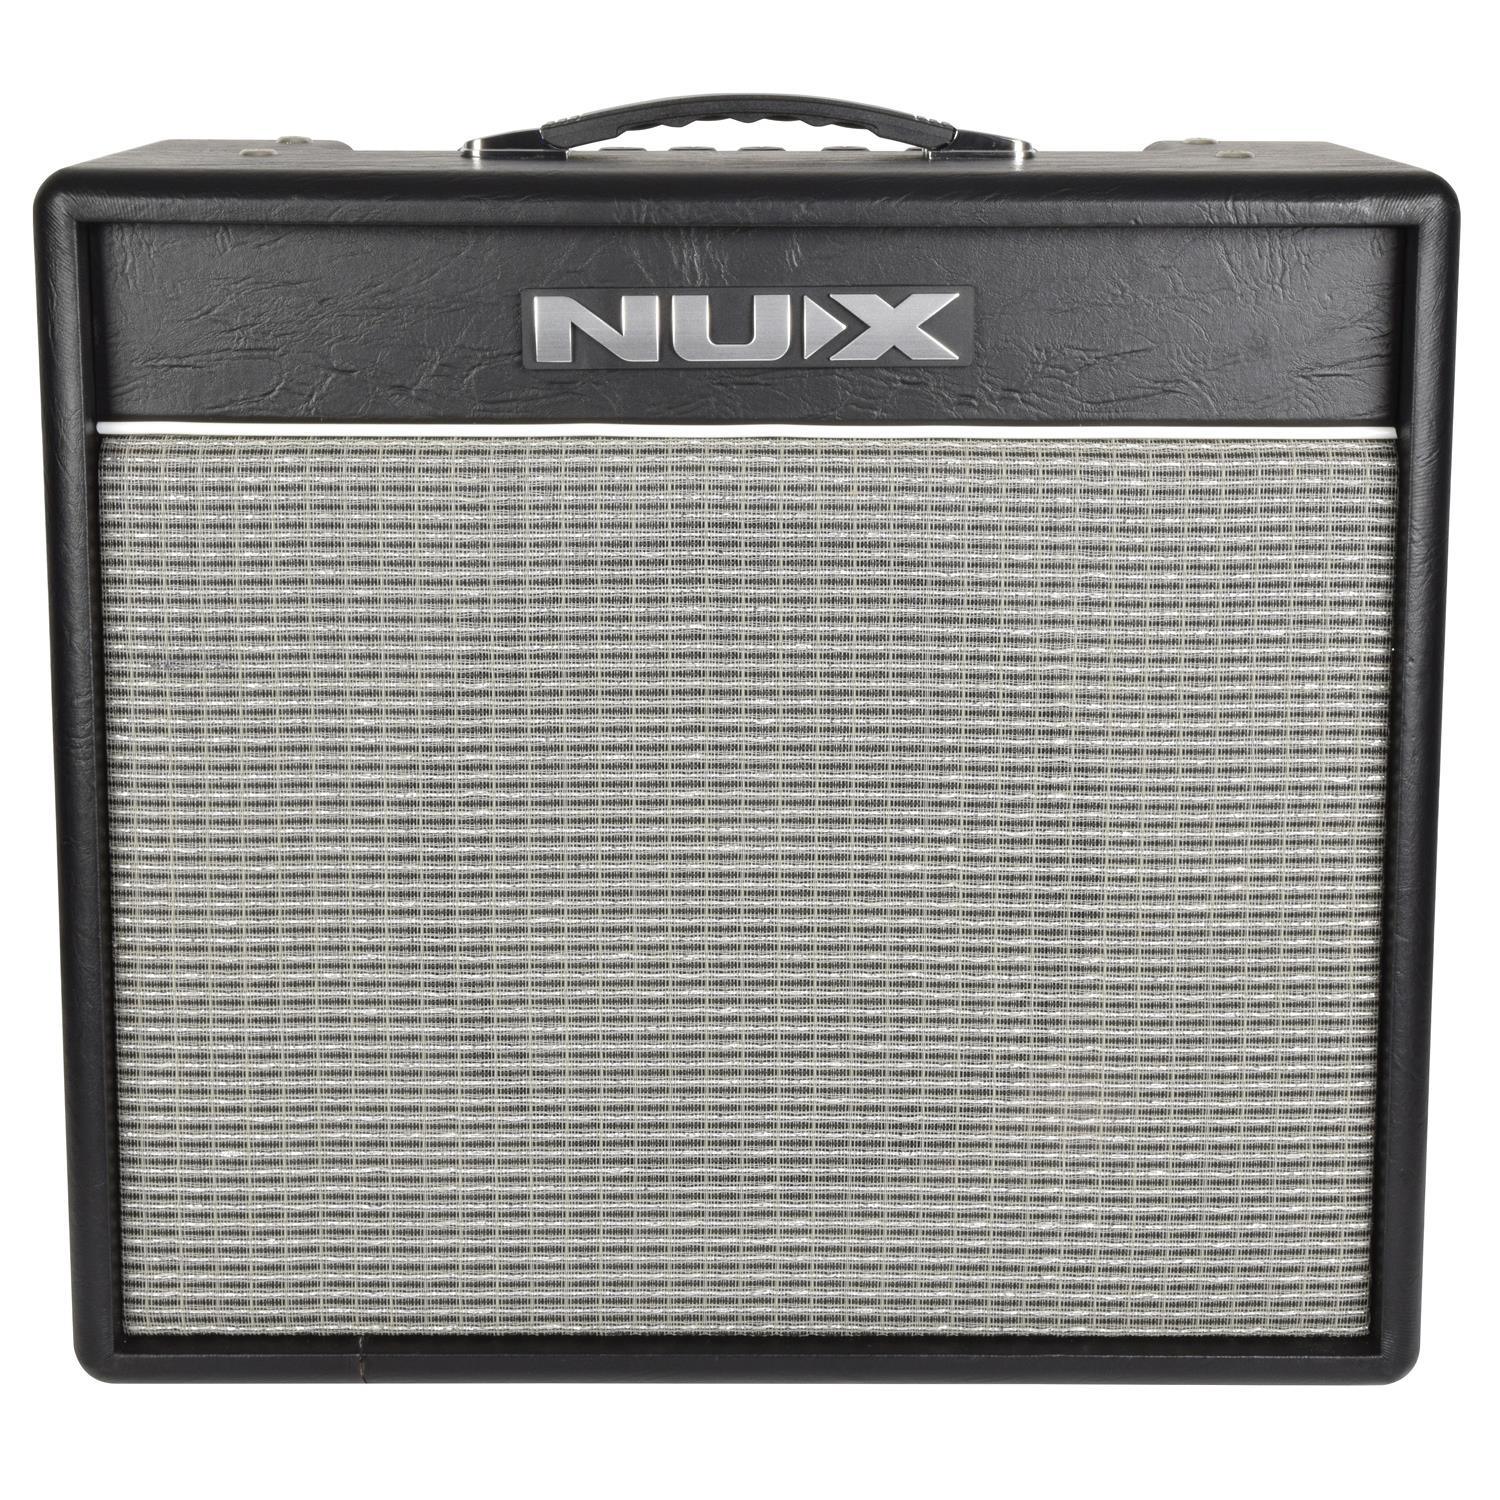 NUX Mighty 40BT 40W Guitar Amplifier with App and Bluetooth Control - DY Pro Audio